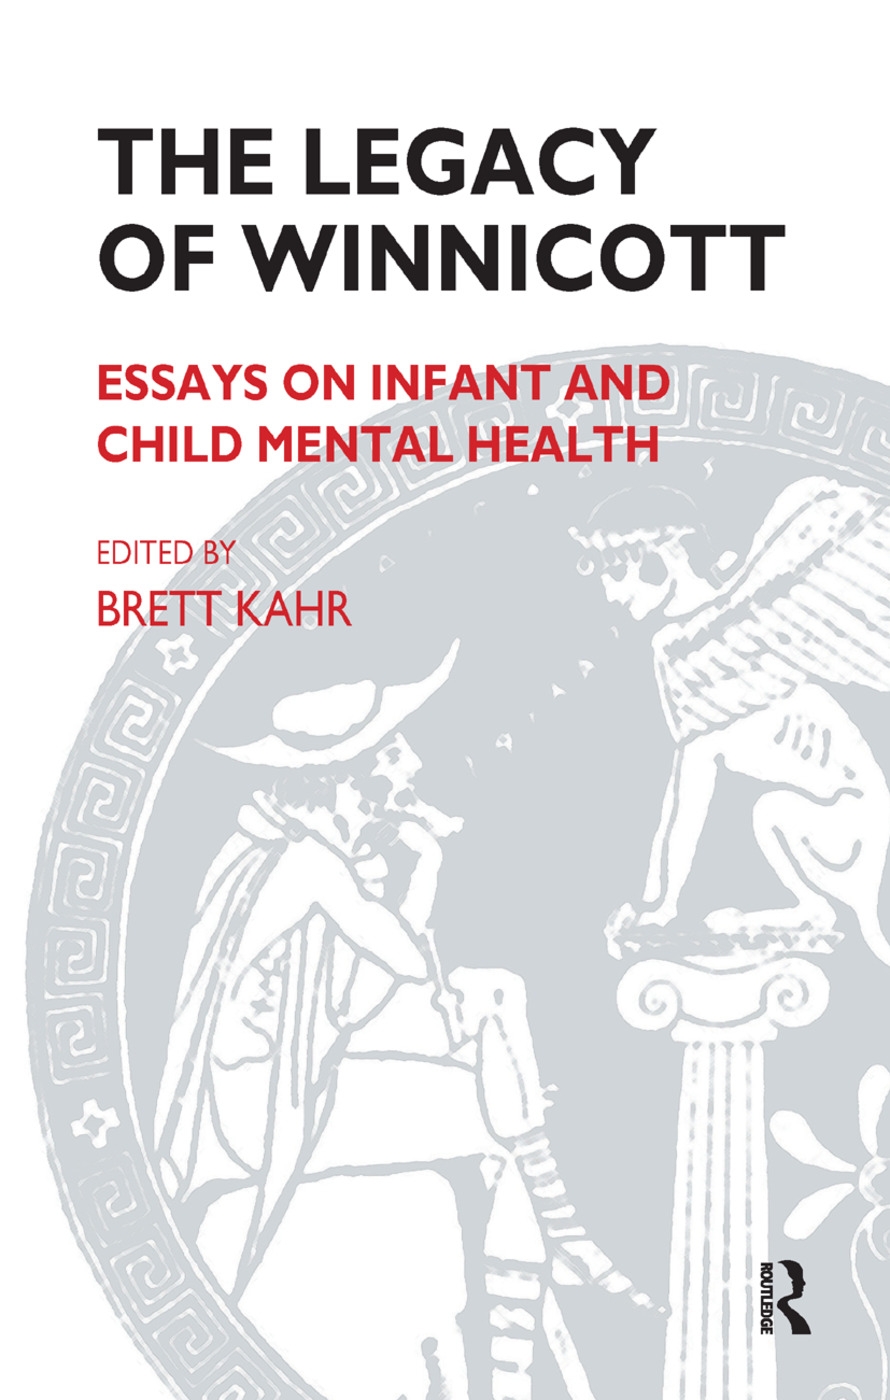 The Legacy of Winnicott: Essays on Infant and Child Mental Health